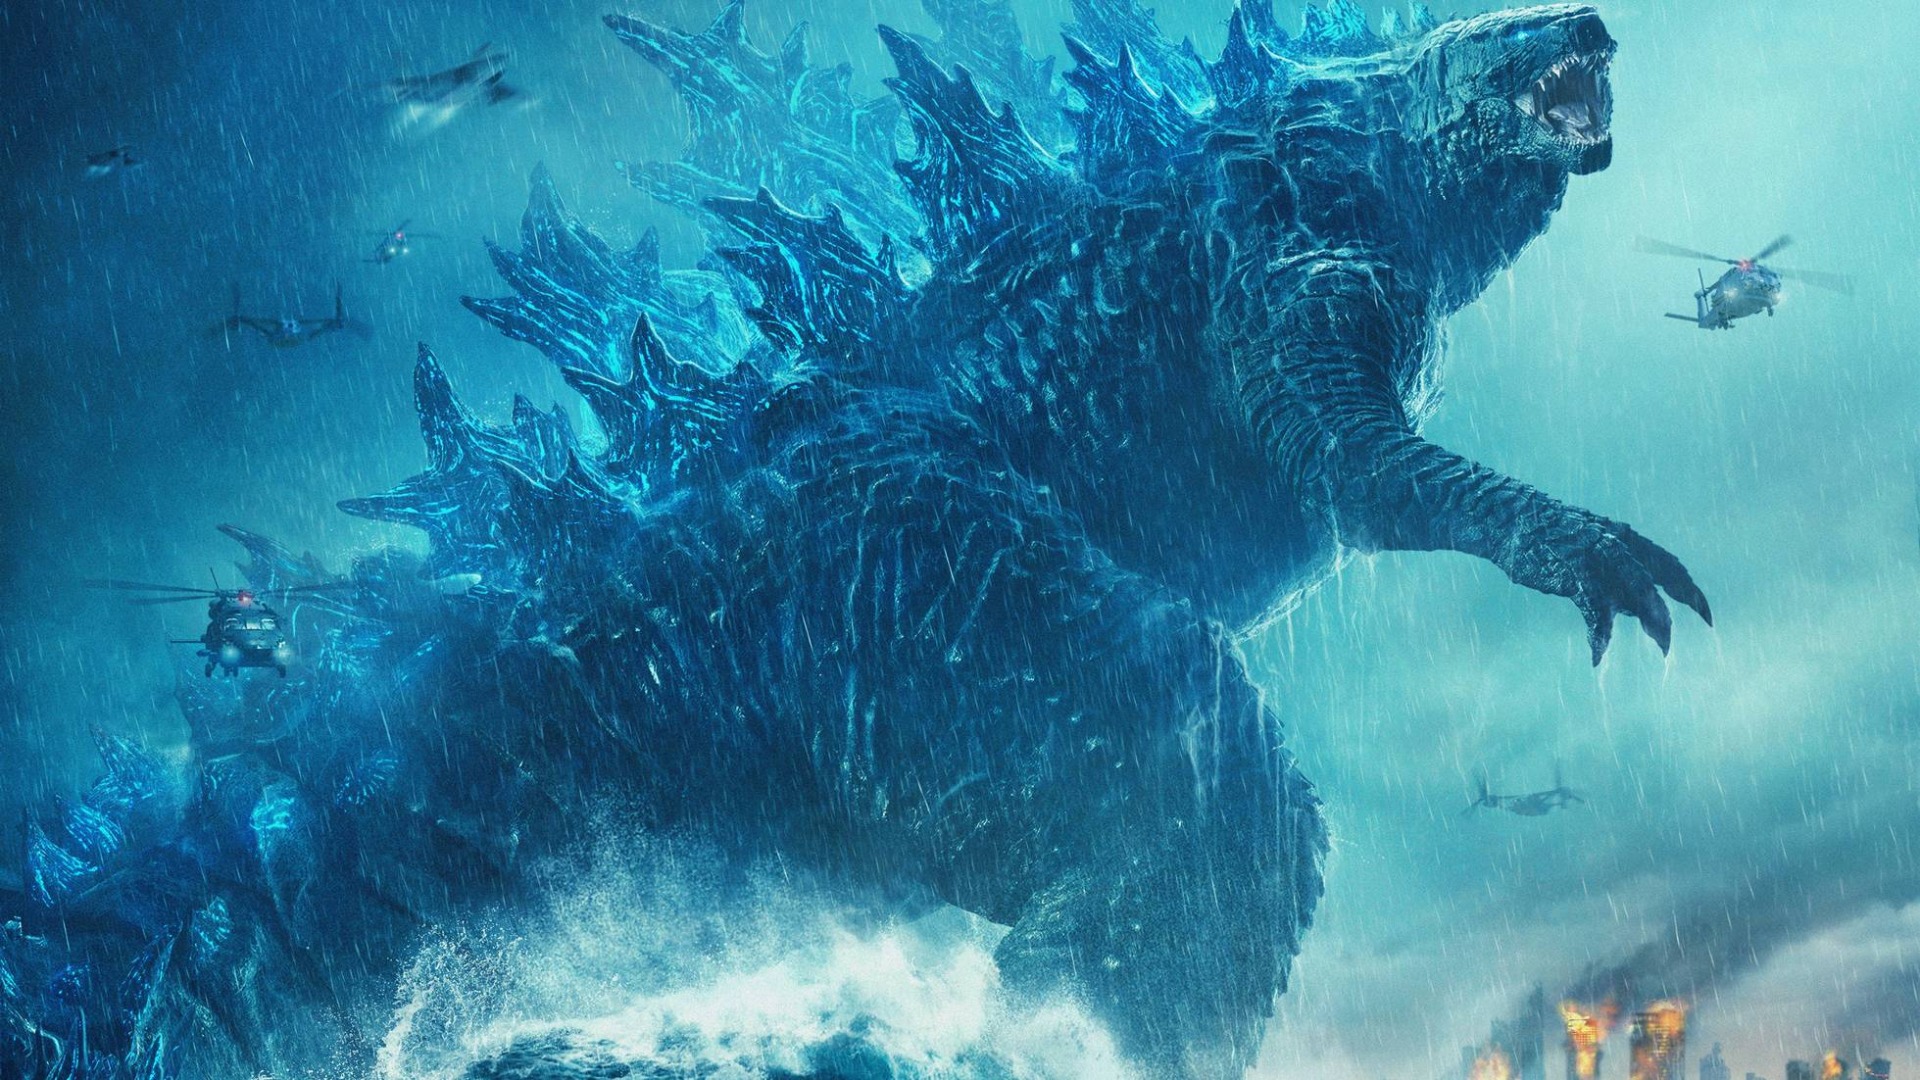 Godzilla: King of the Monsters / Godzilla: King of the Monsters (2019)